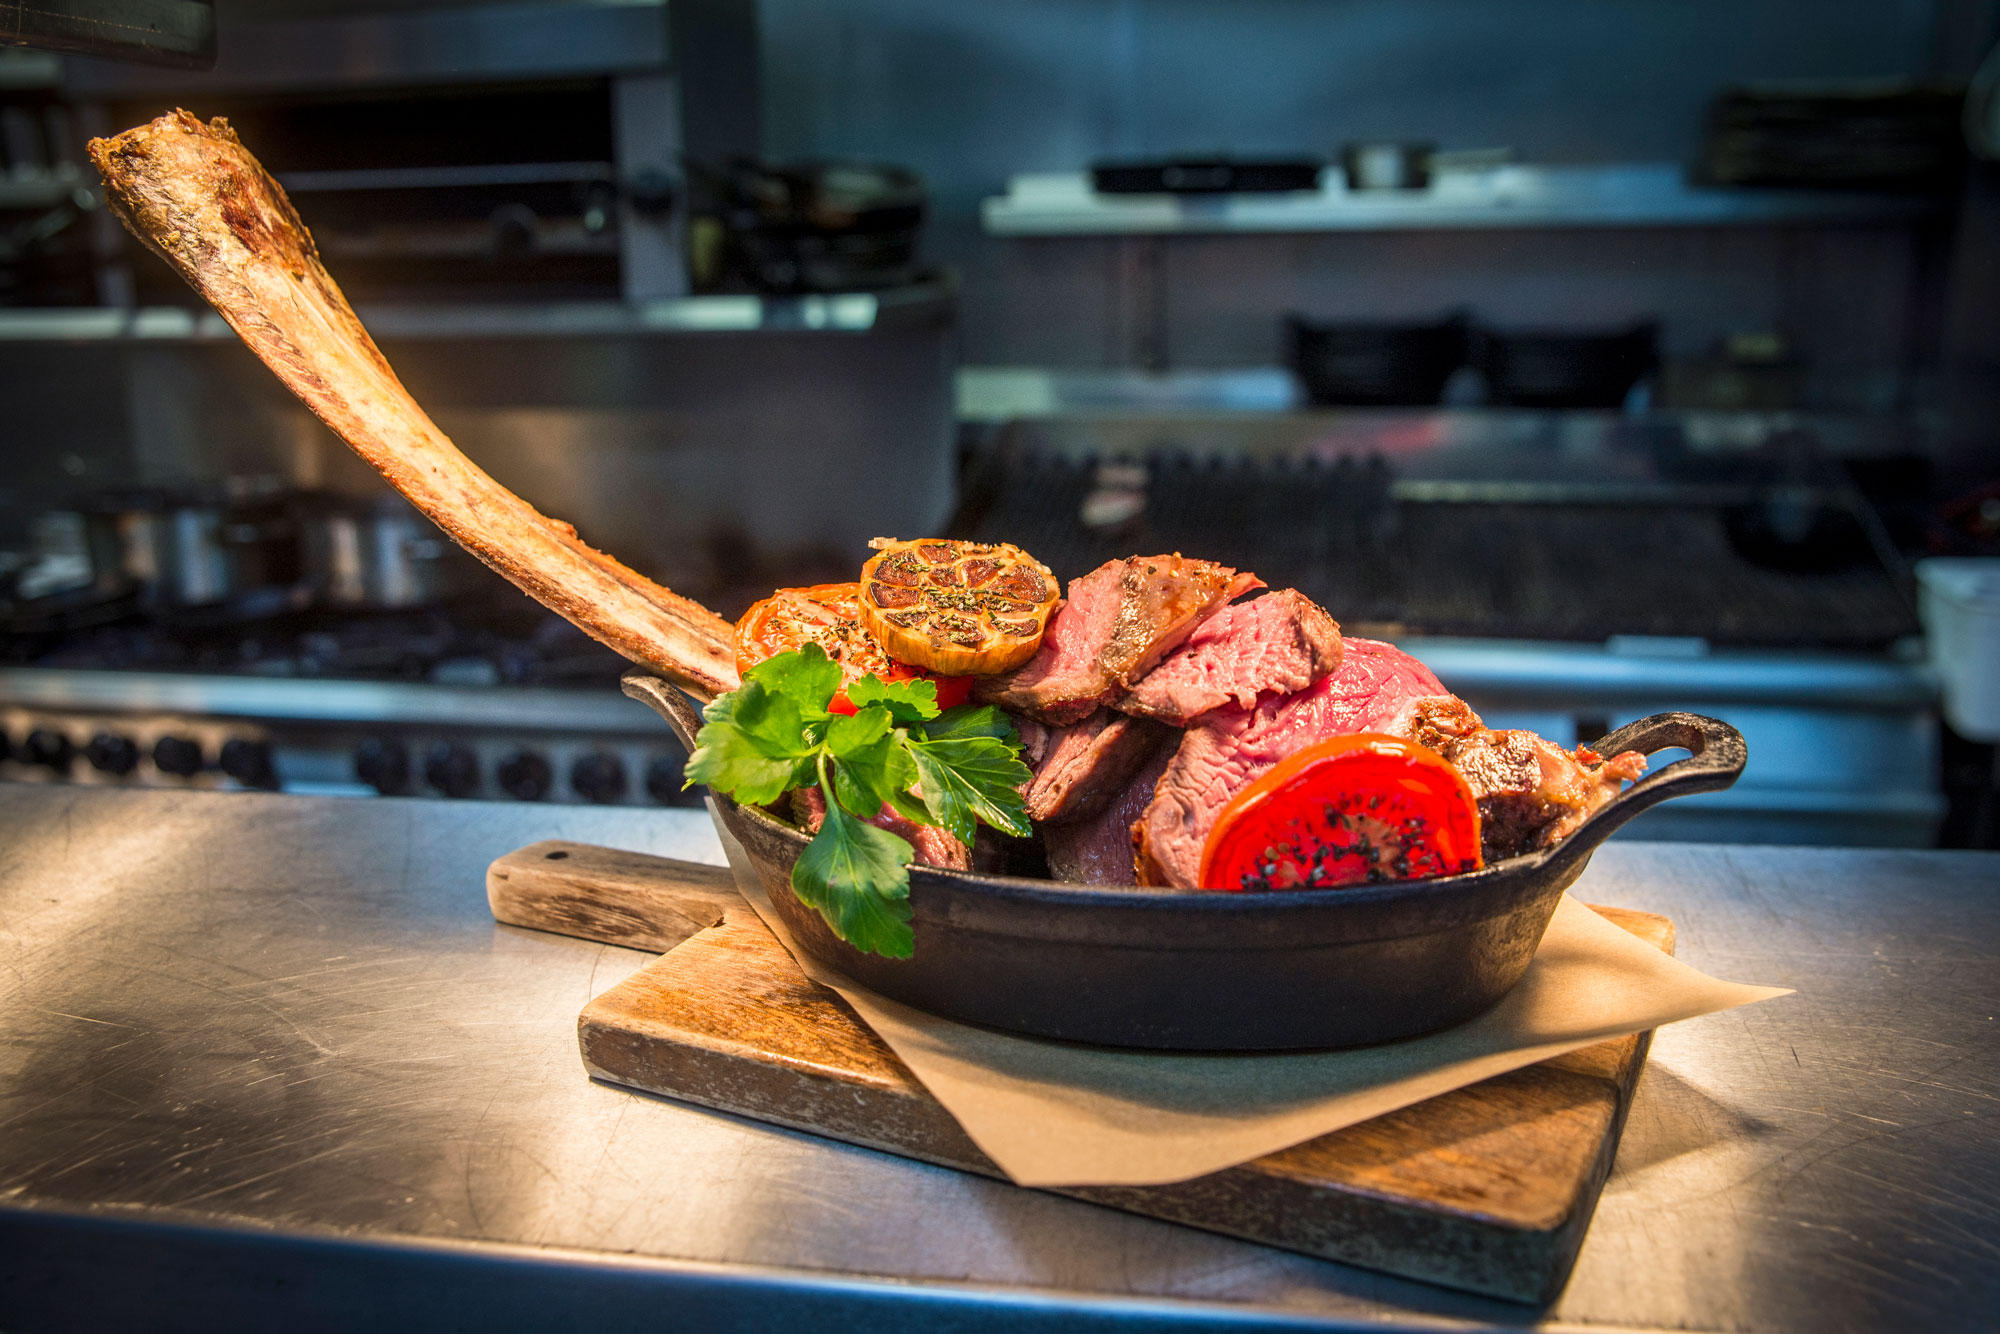 A Tomahawk steak on the pass at Hutcheson's in Glasgow's Merchant City